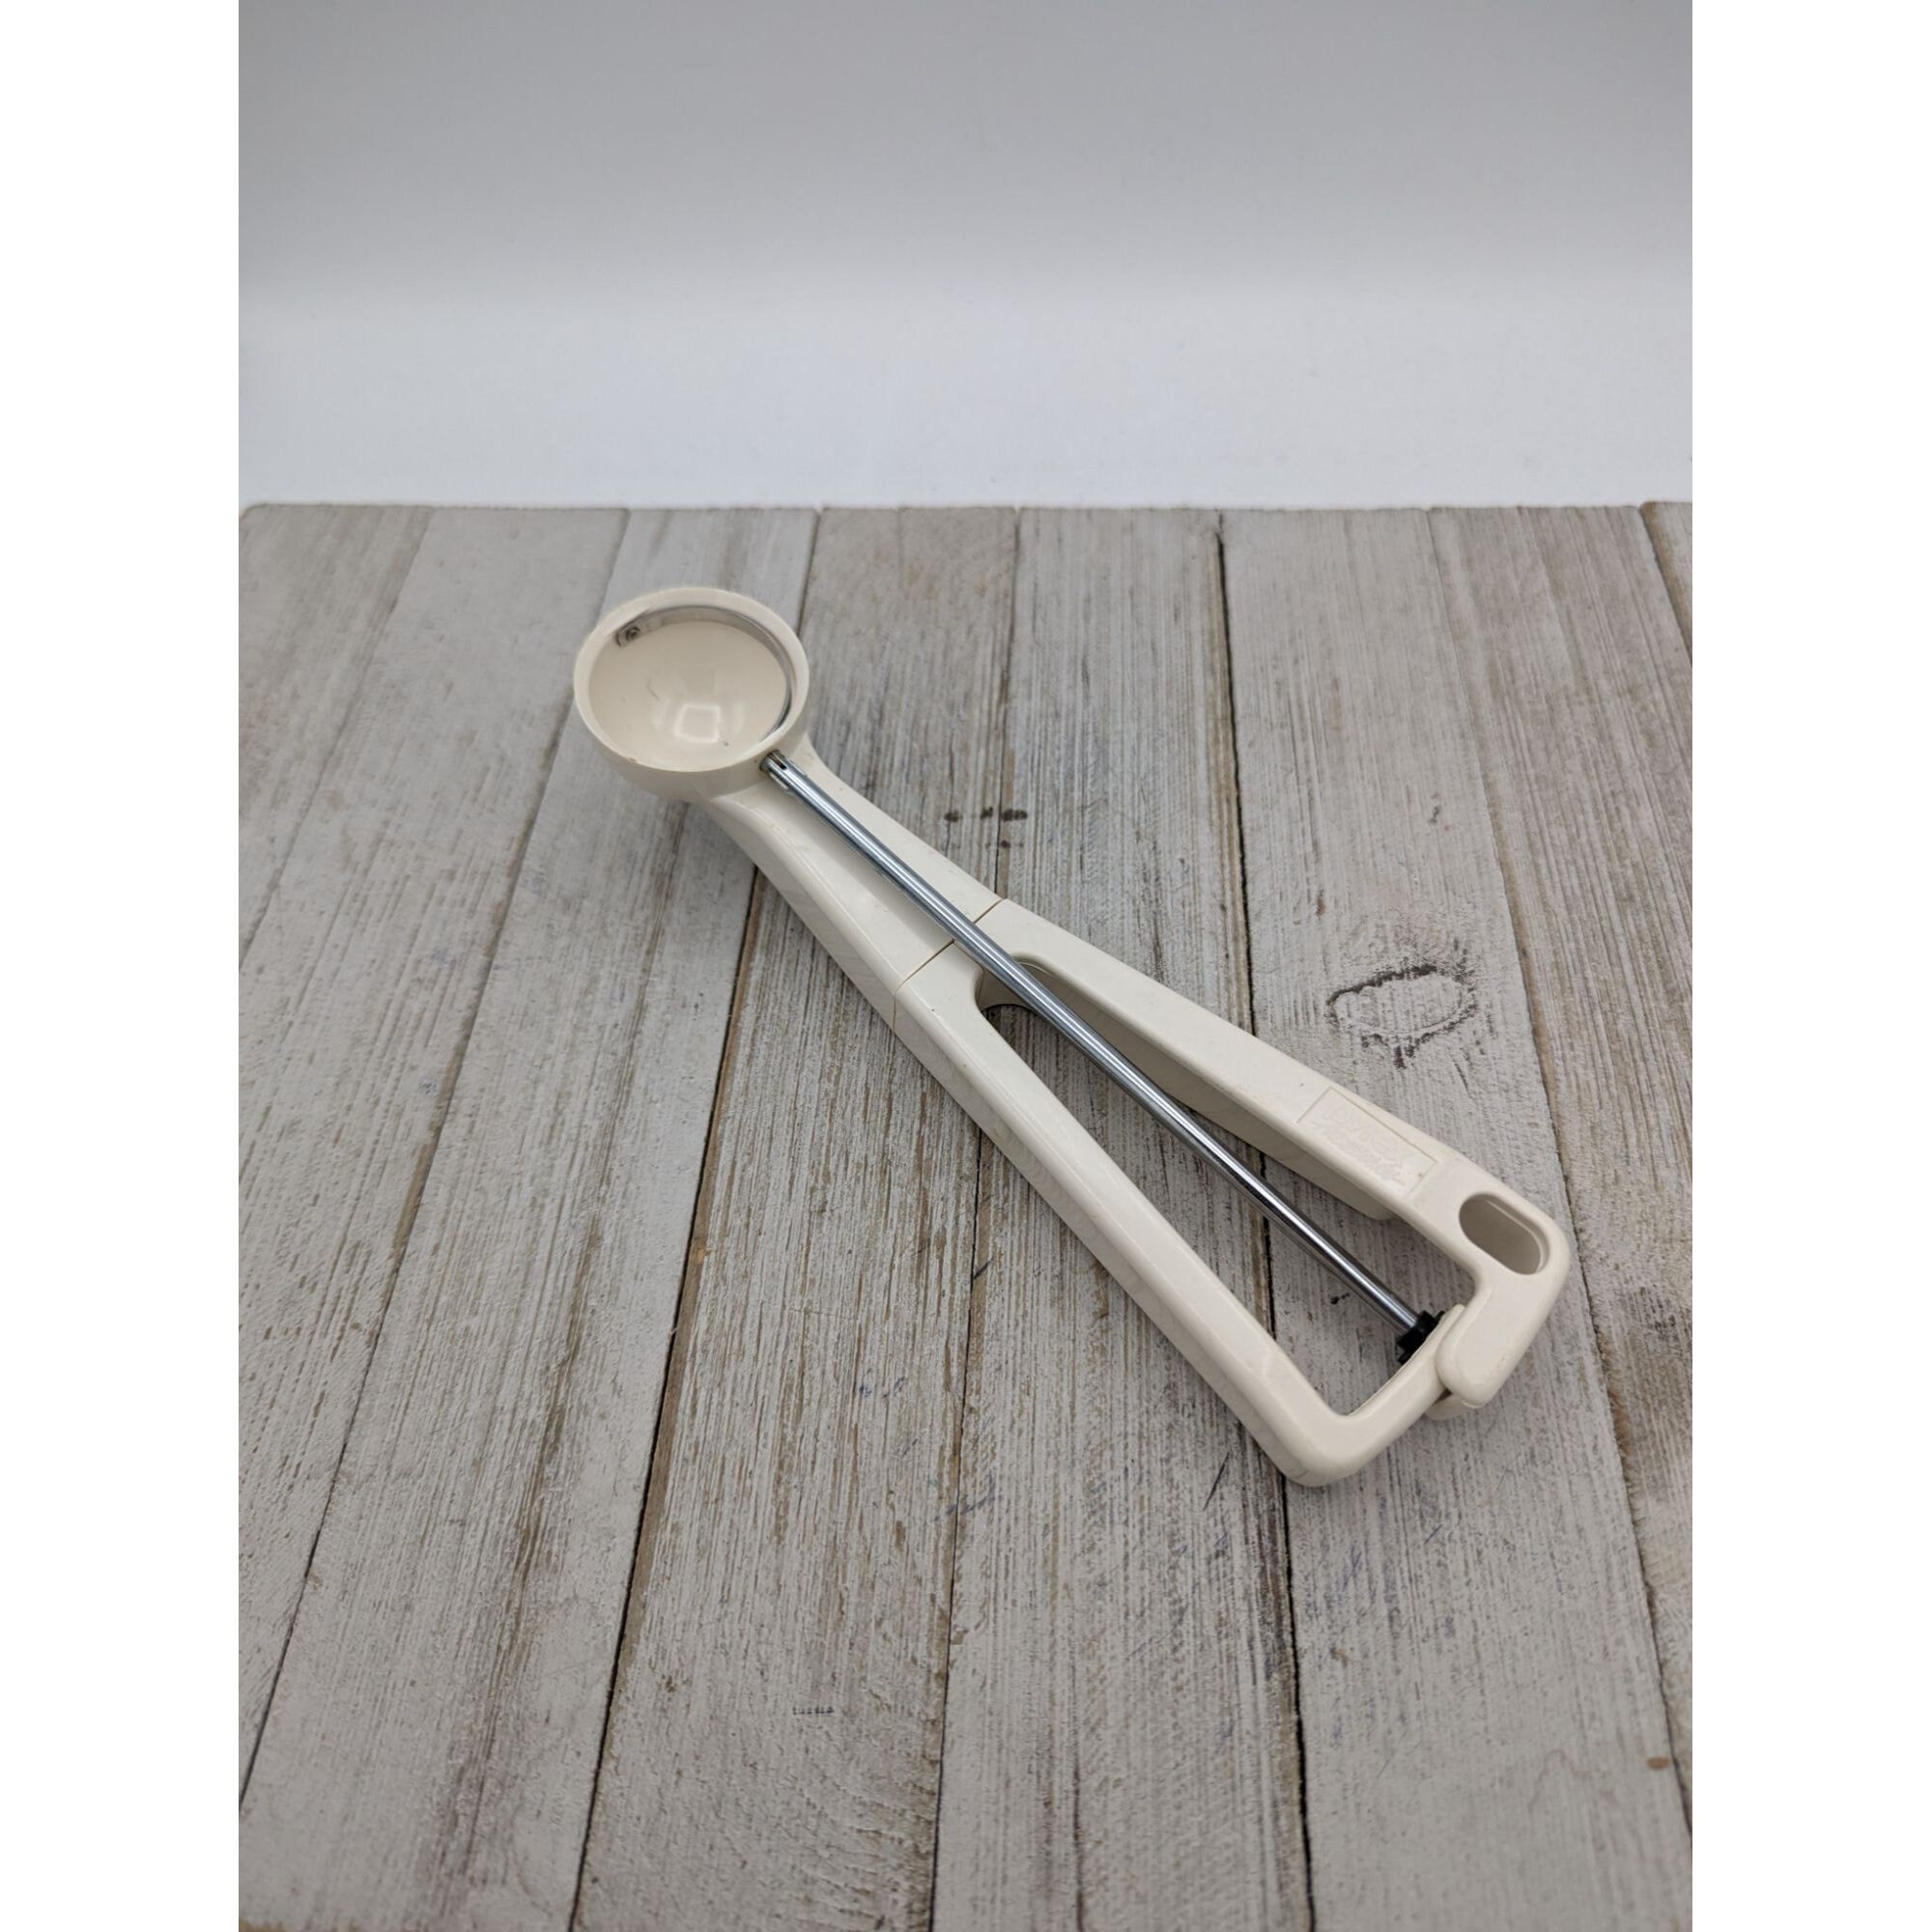 Cookie Scoop Set Ice Cream Scoop 18/8 Stainless Steel with Anti Slip Rubber  Grip Cookie Dough Scooper with Trigger Release - AliExpress